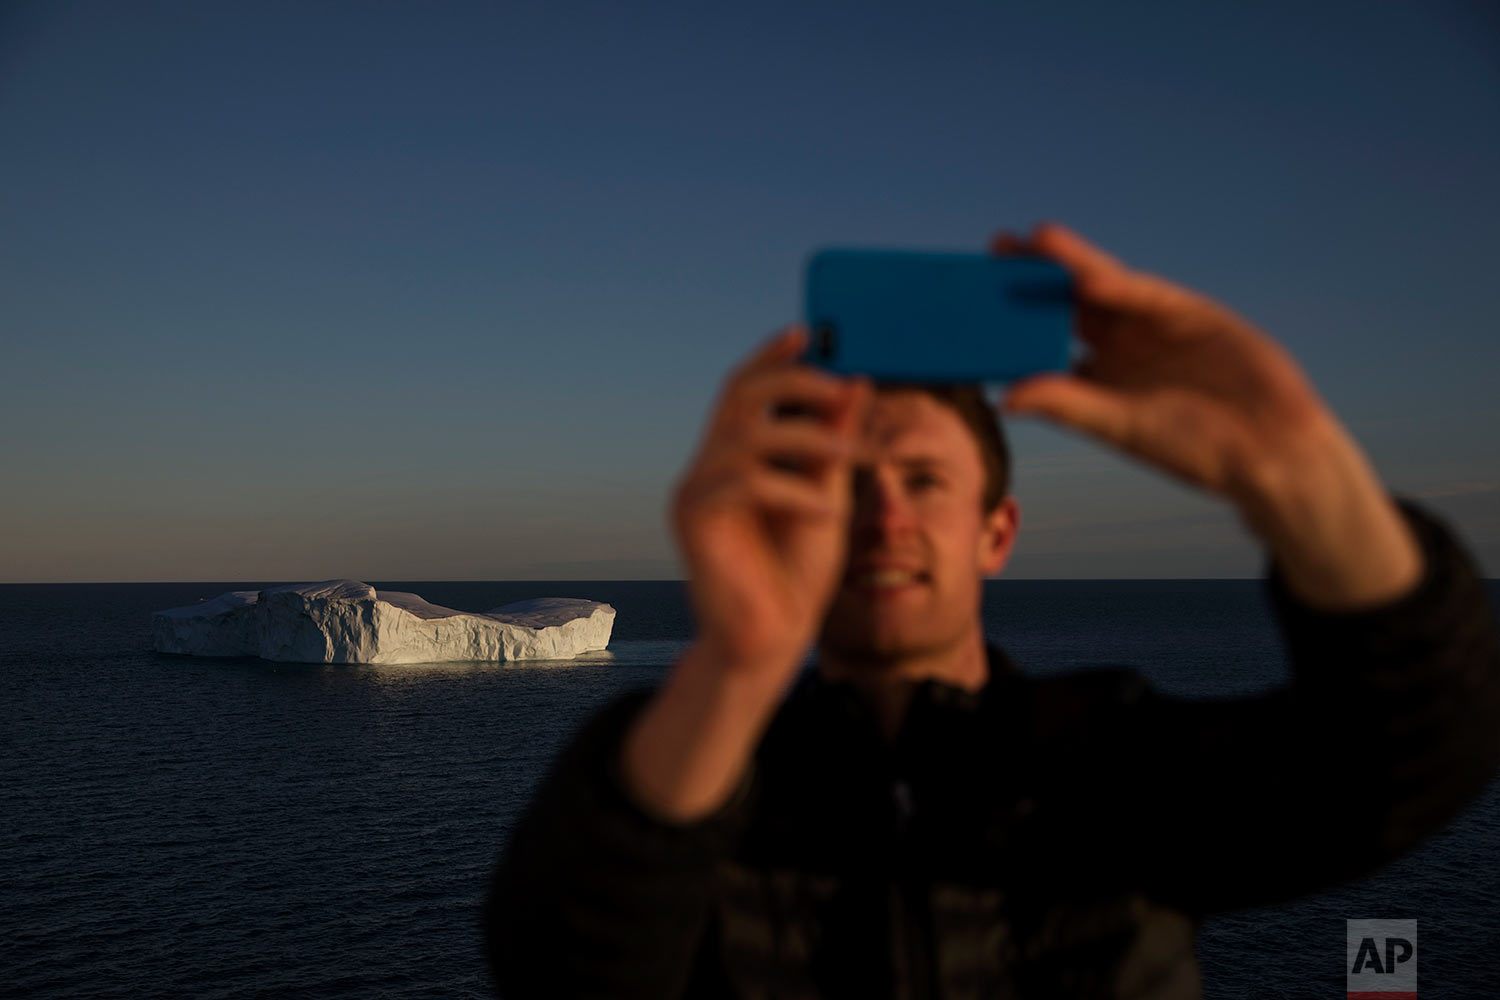  Researcher Scott Joblin takes a selfie while passing an iceberg floating in Baffin Bay in the Canadian Arctic Archipelago while aboard the Finnish icebreaker MSV Nordica, Tuesday, July 25, 2017.(AP Photo/David Goldman) 